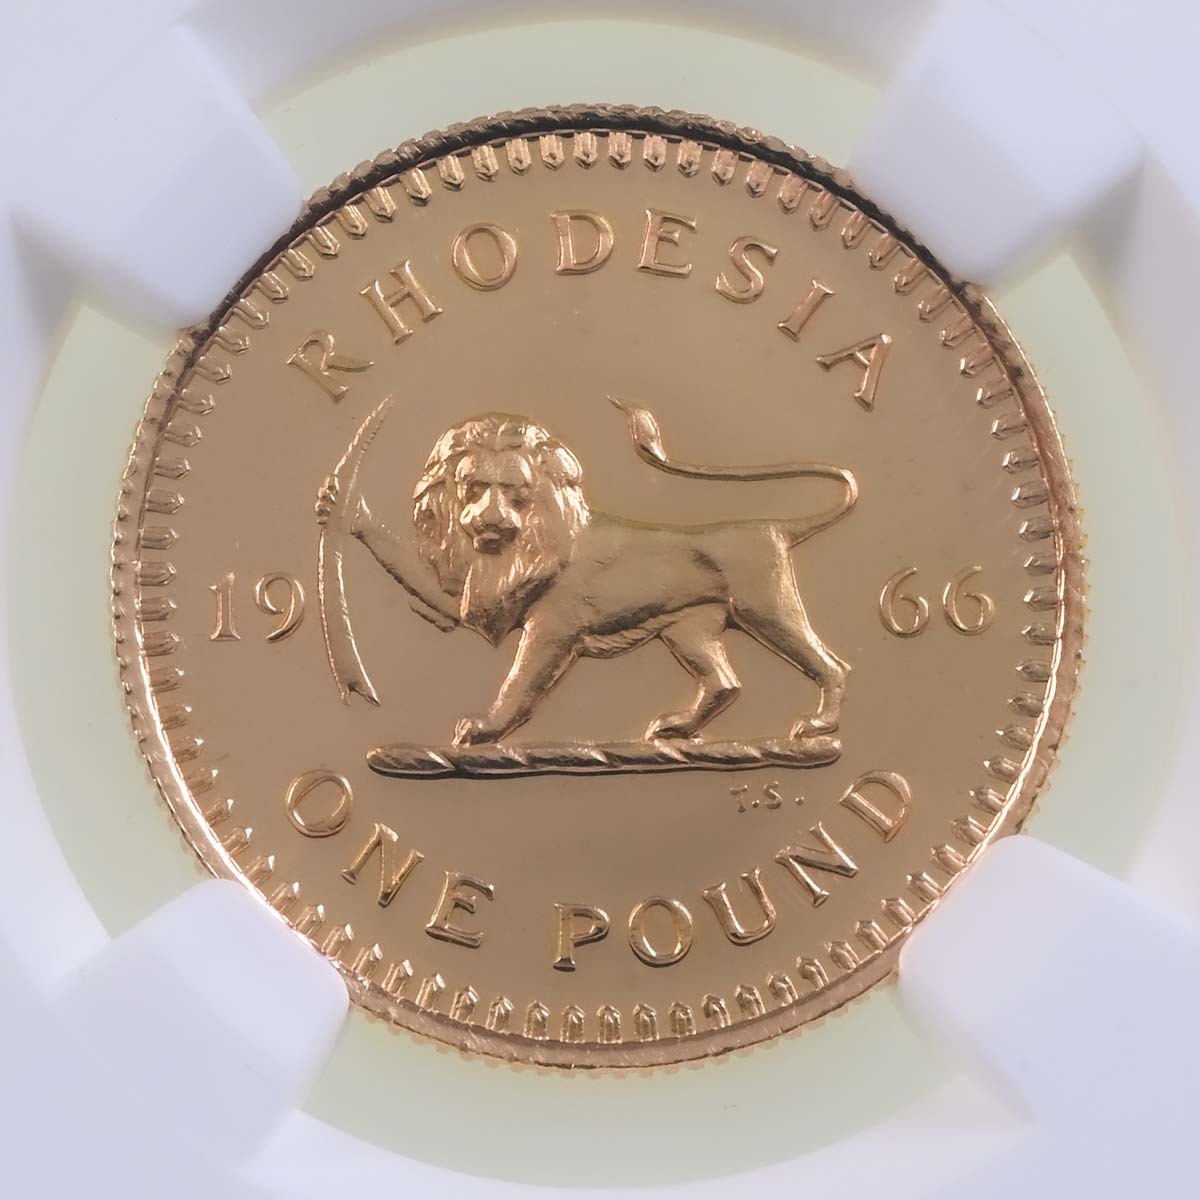 1966 Rhodesia One Pound Gold Proof Coin NGC Graded PF 67 Cameo Reverse